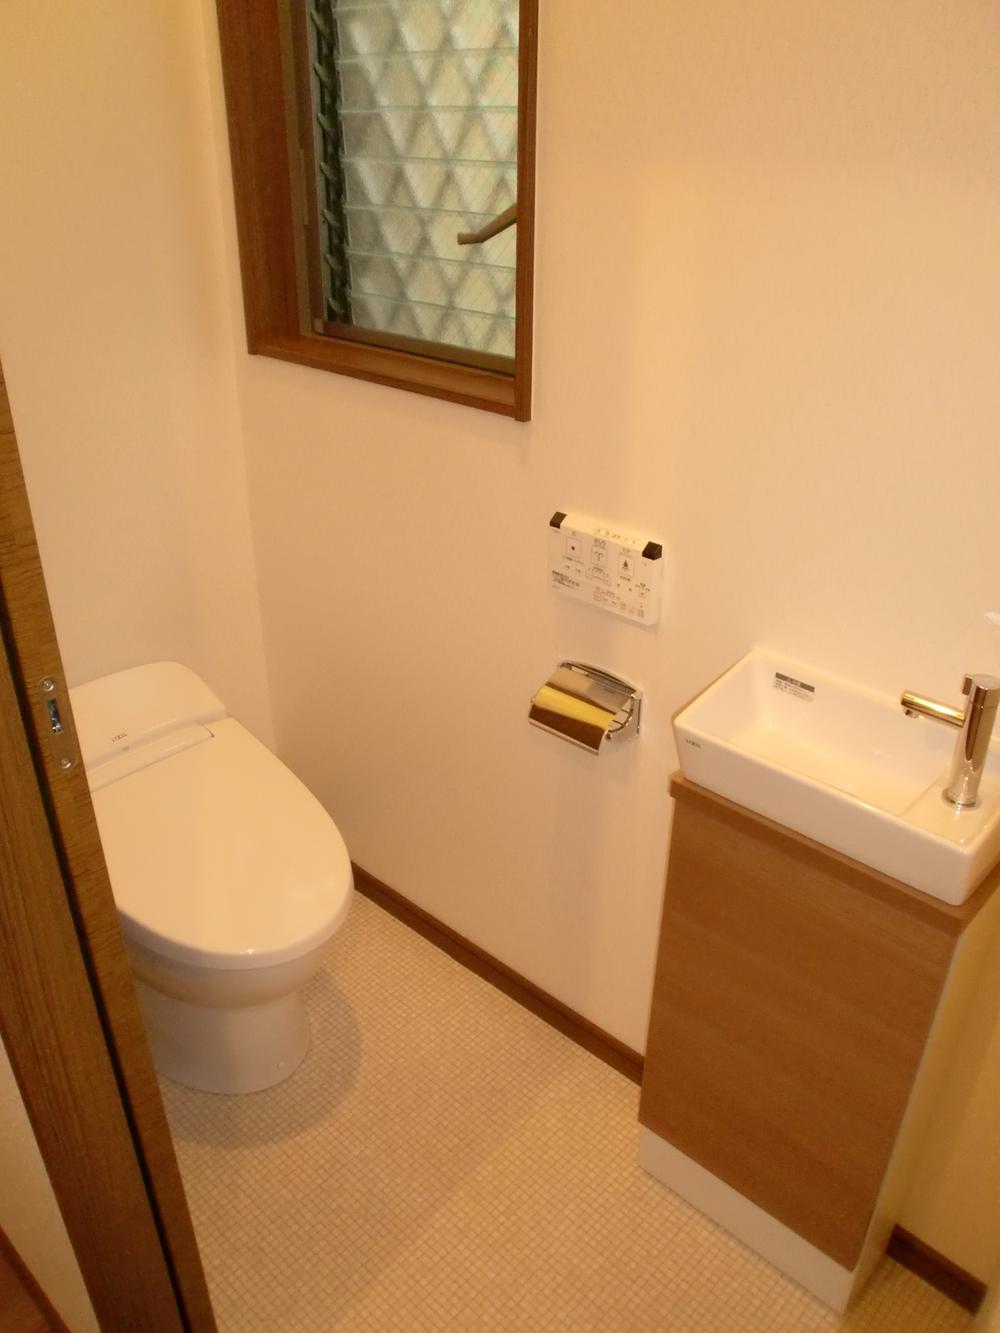 Toilet. It is also spacious and toilet.